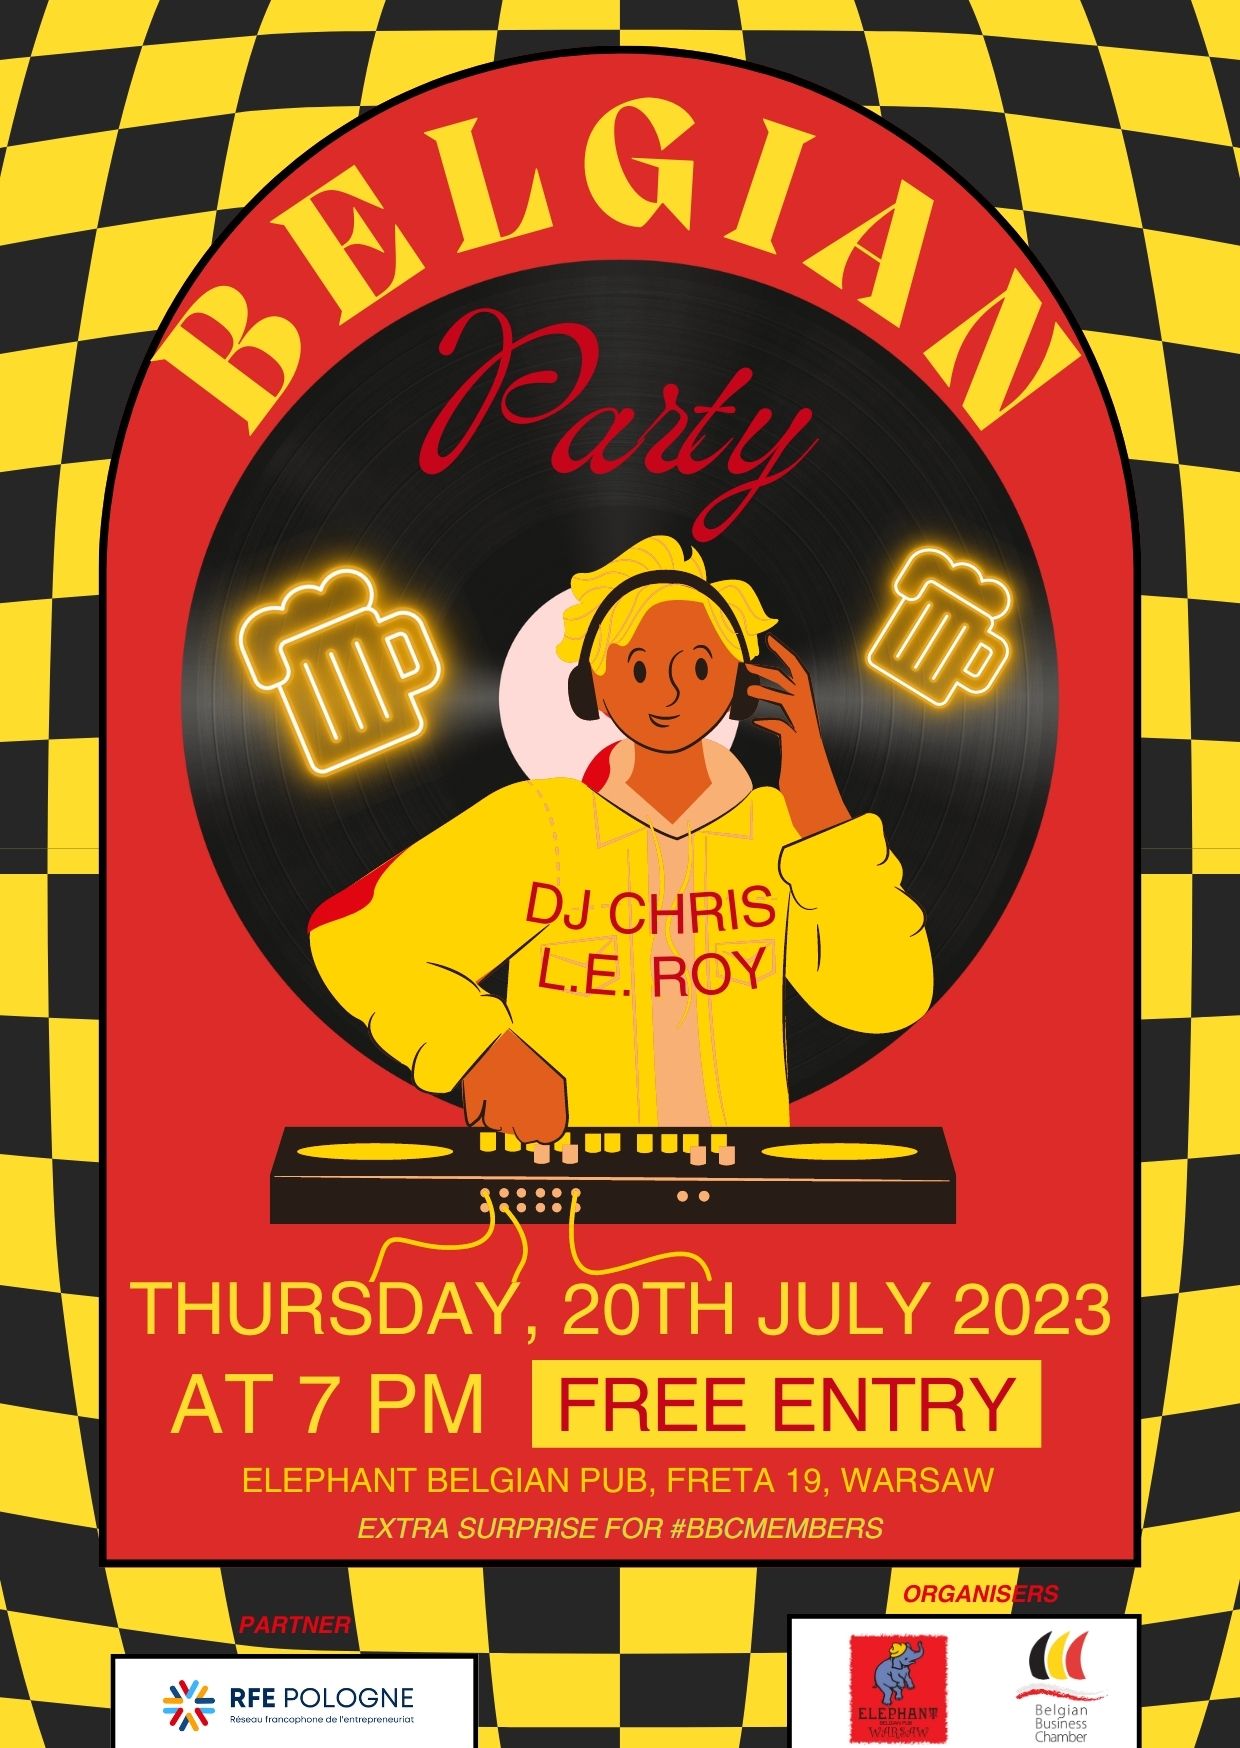 Join us for the Belgian Party on Thursday July 20th at Elephant Belgian Pub!